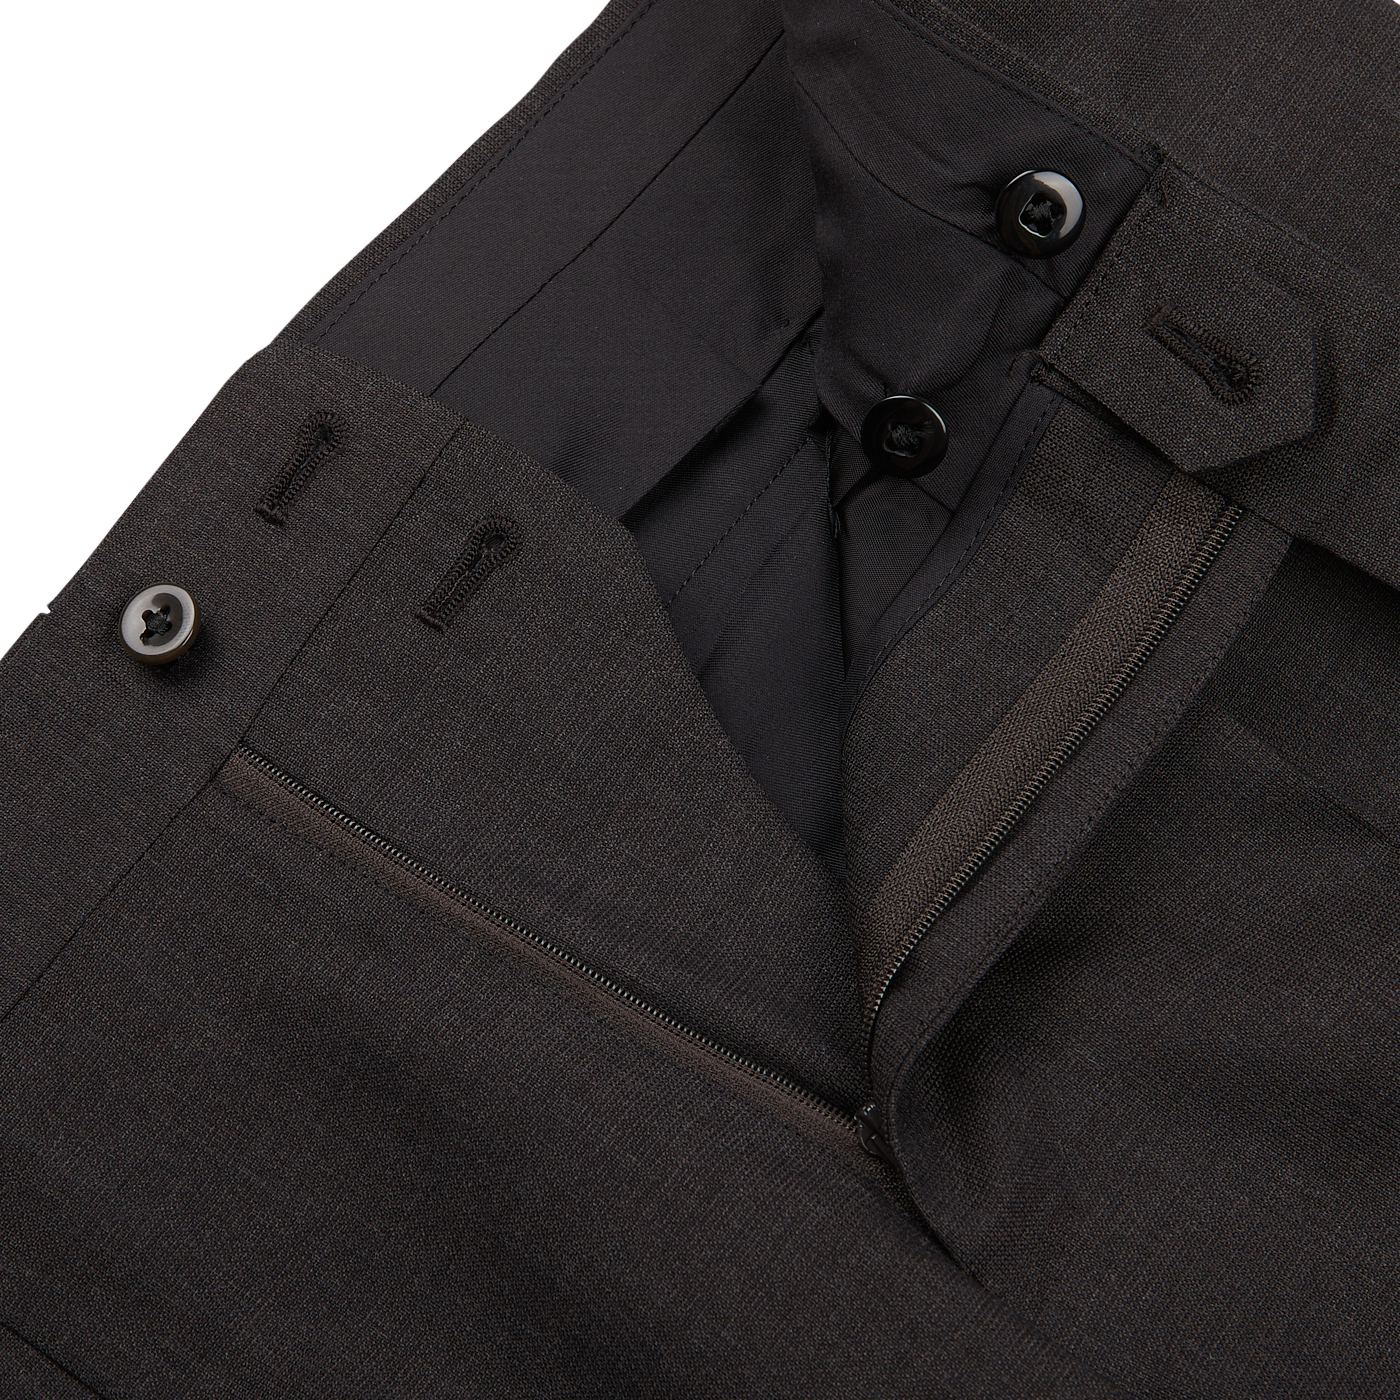 Close-up of a dark gray Ring Jacket High Twist Wool Suit focusing on the zipper and button details.